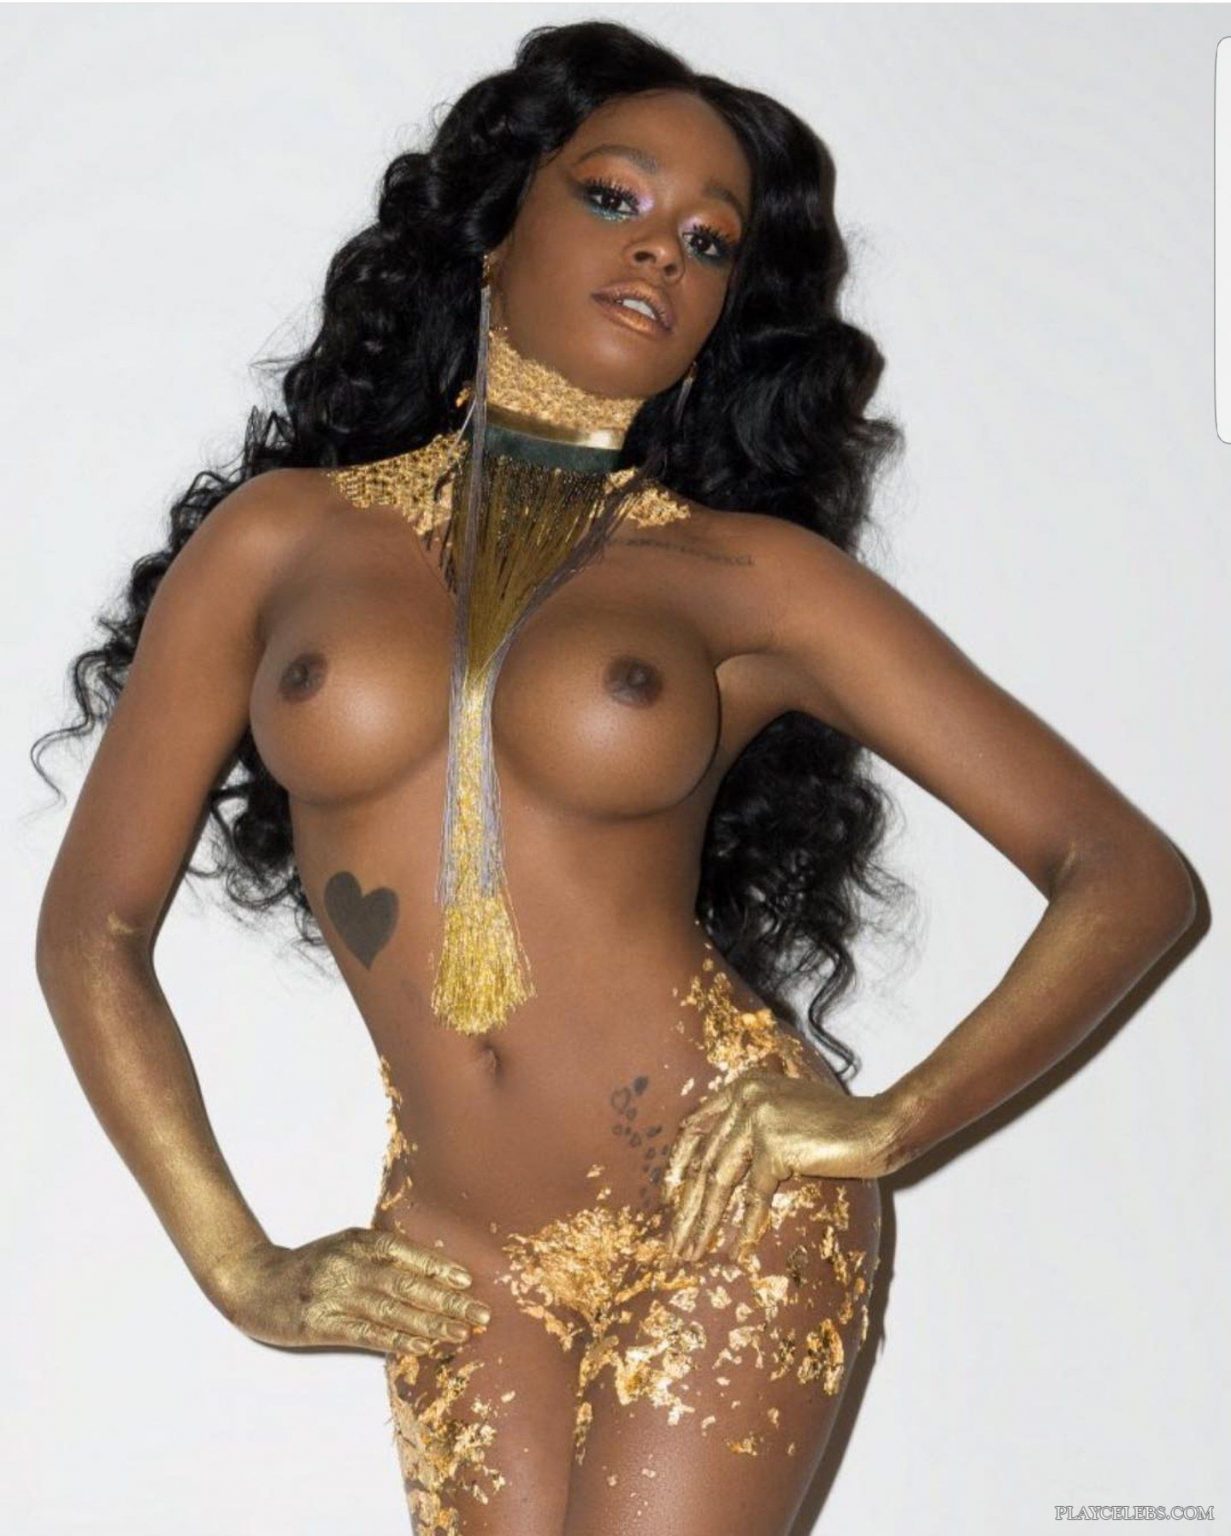 You are currently viewing Azealia Banks Nude And Sexy Photoshoot.